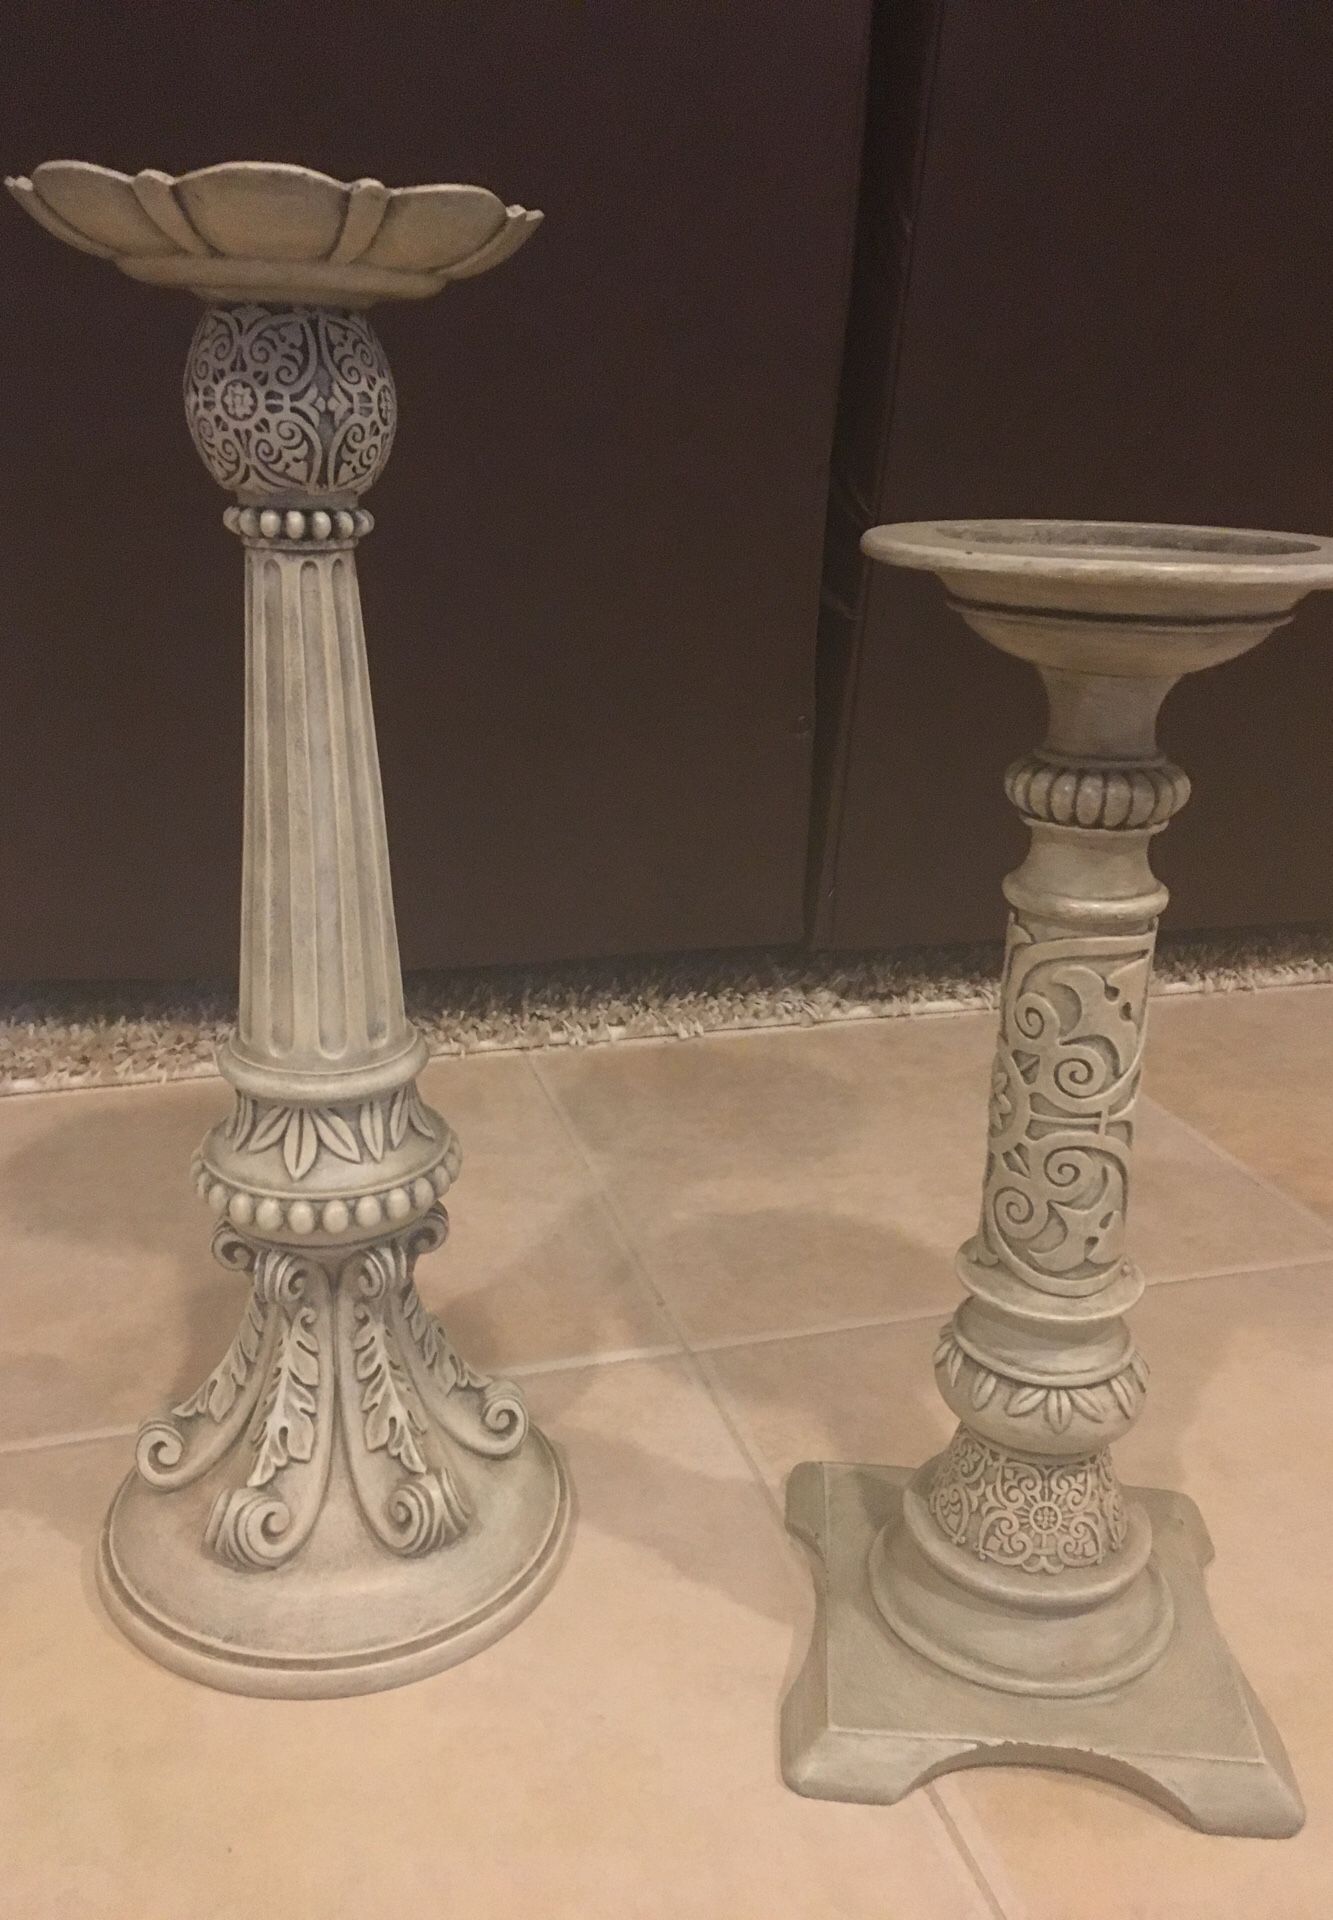 20” & 16” tall parti lite candle holders